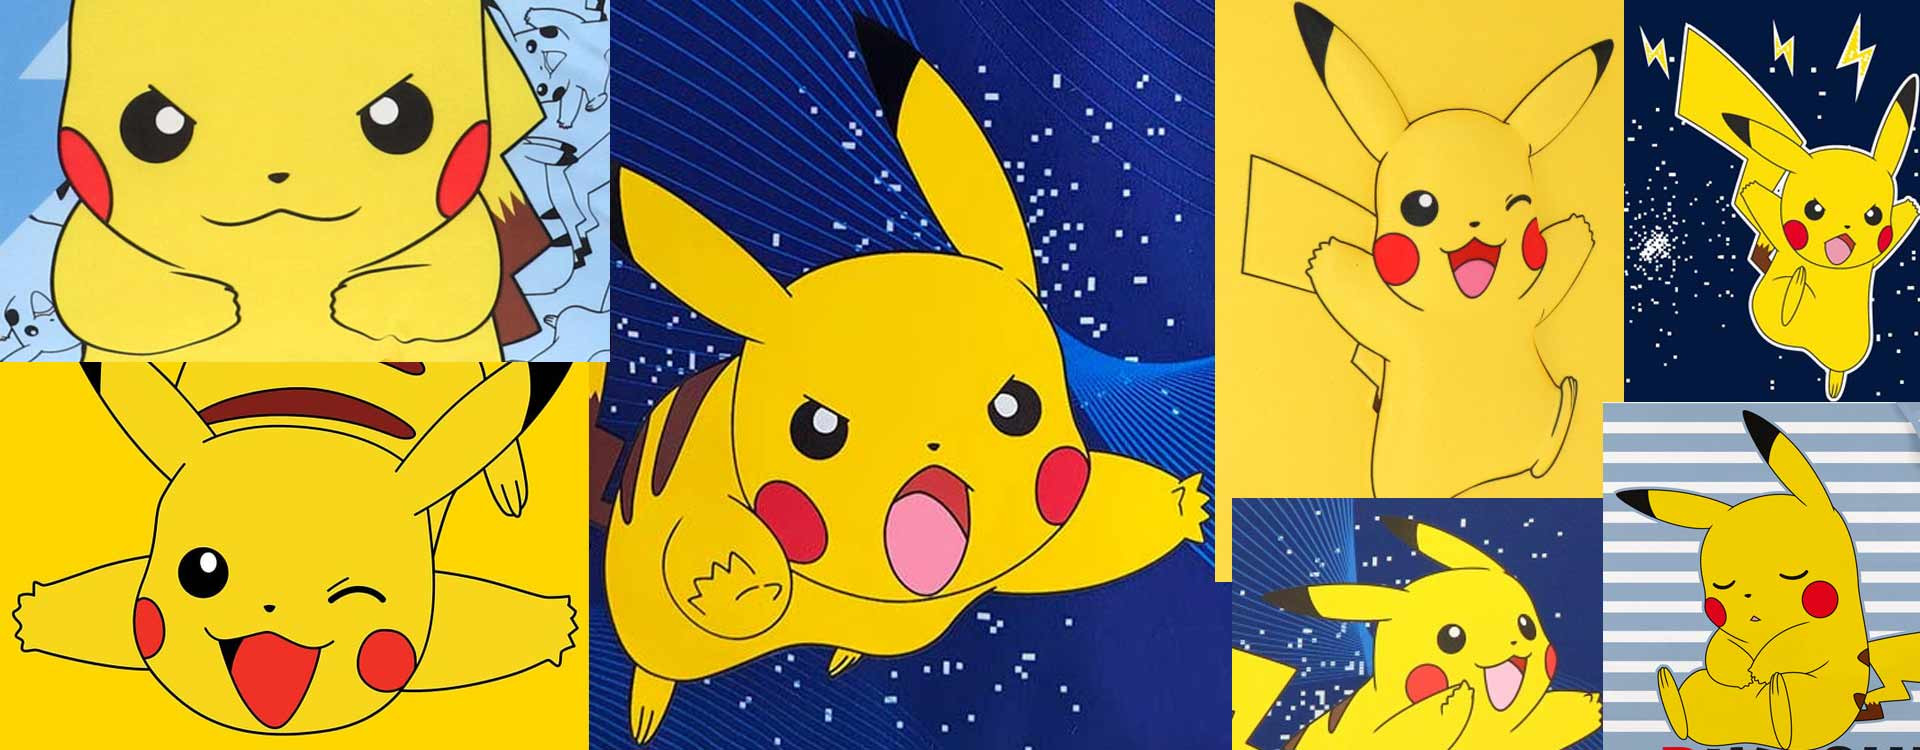 Who is Pikachu, this Pokémon so adored by children?